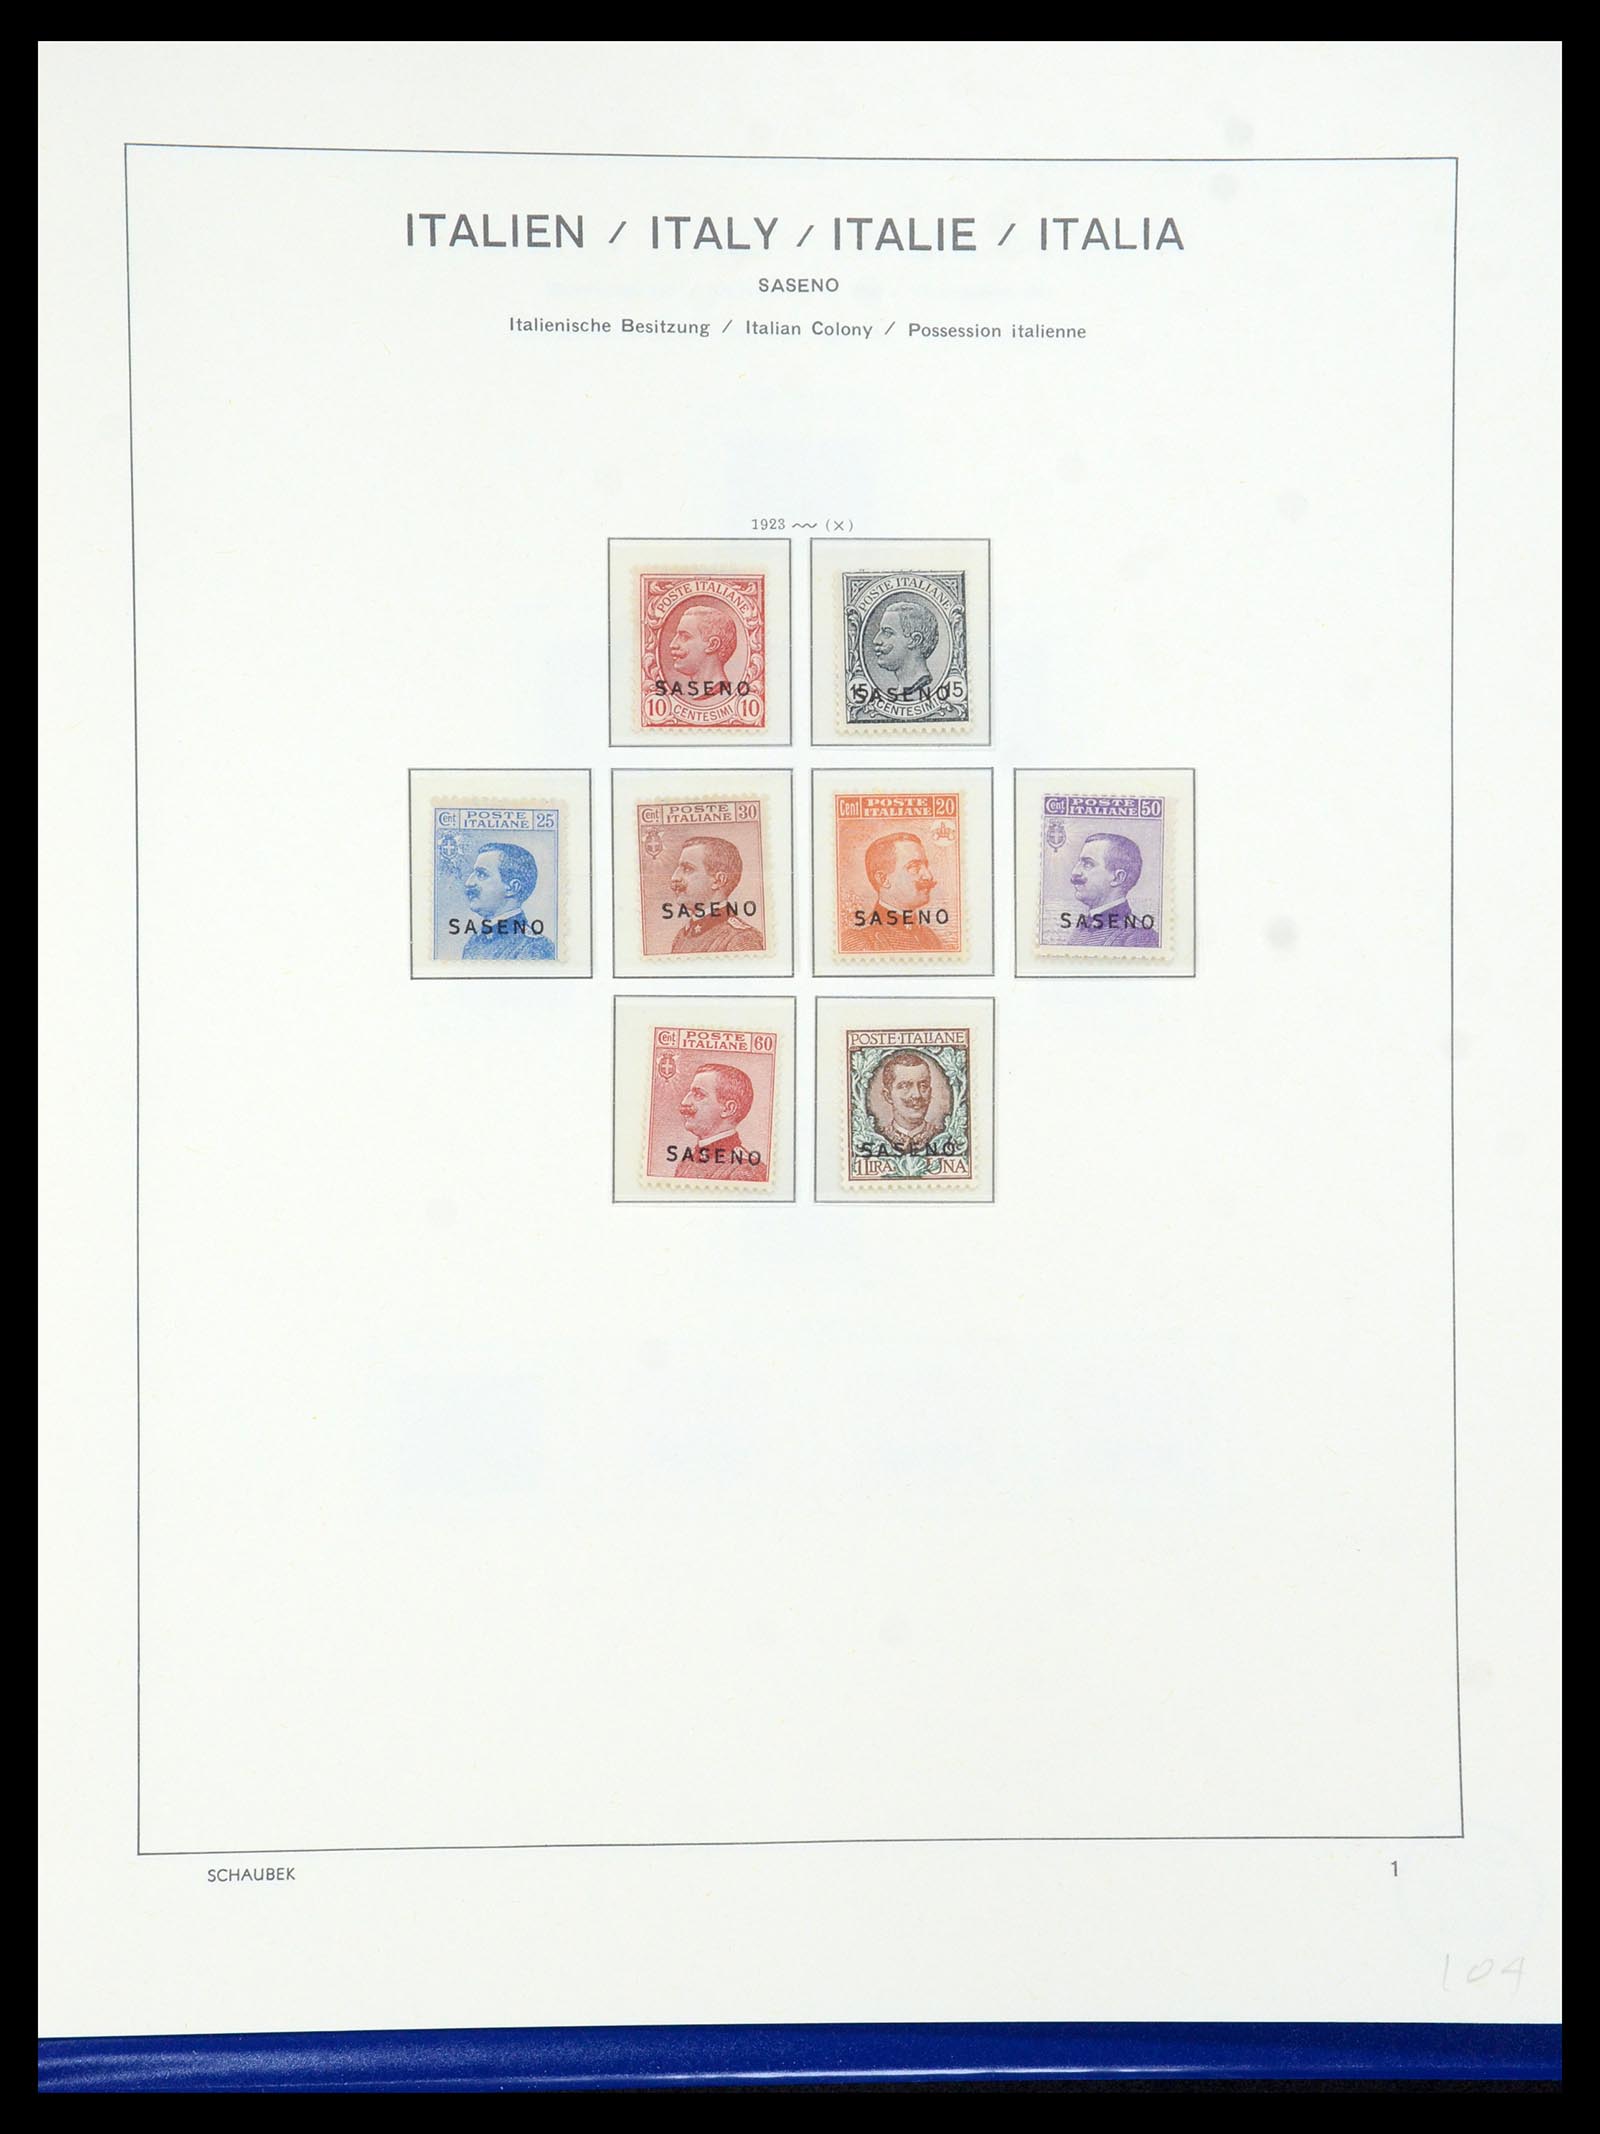 36181 059 - Stamp collection 36181 Italian Aegean Islands 1912-1941.